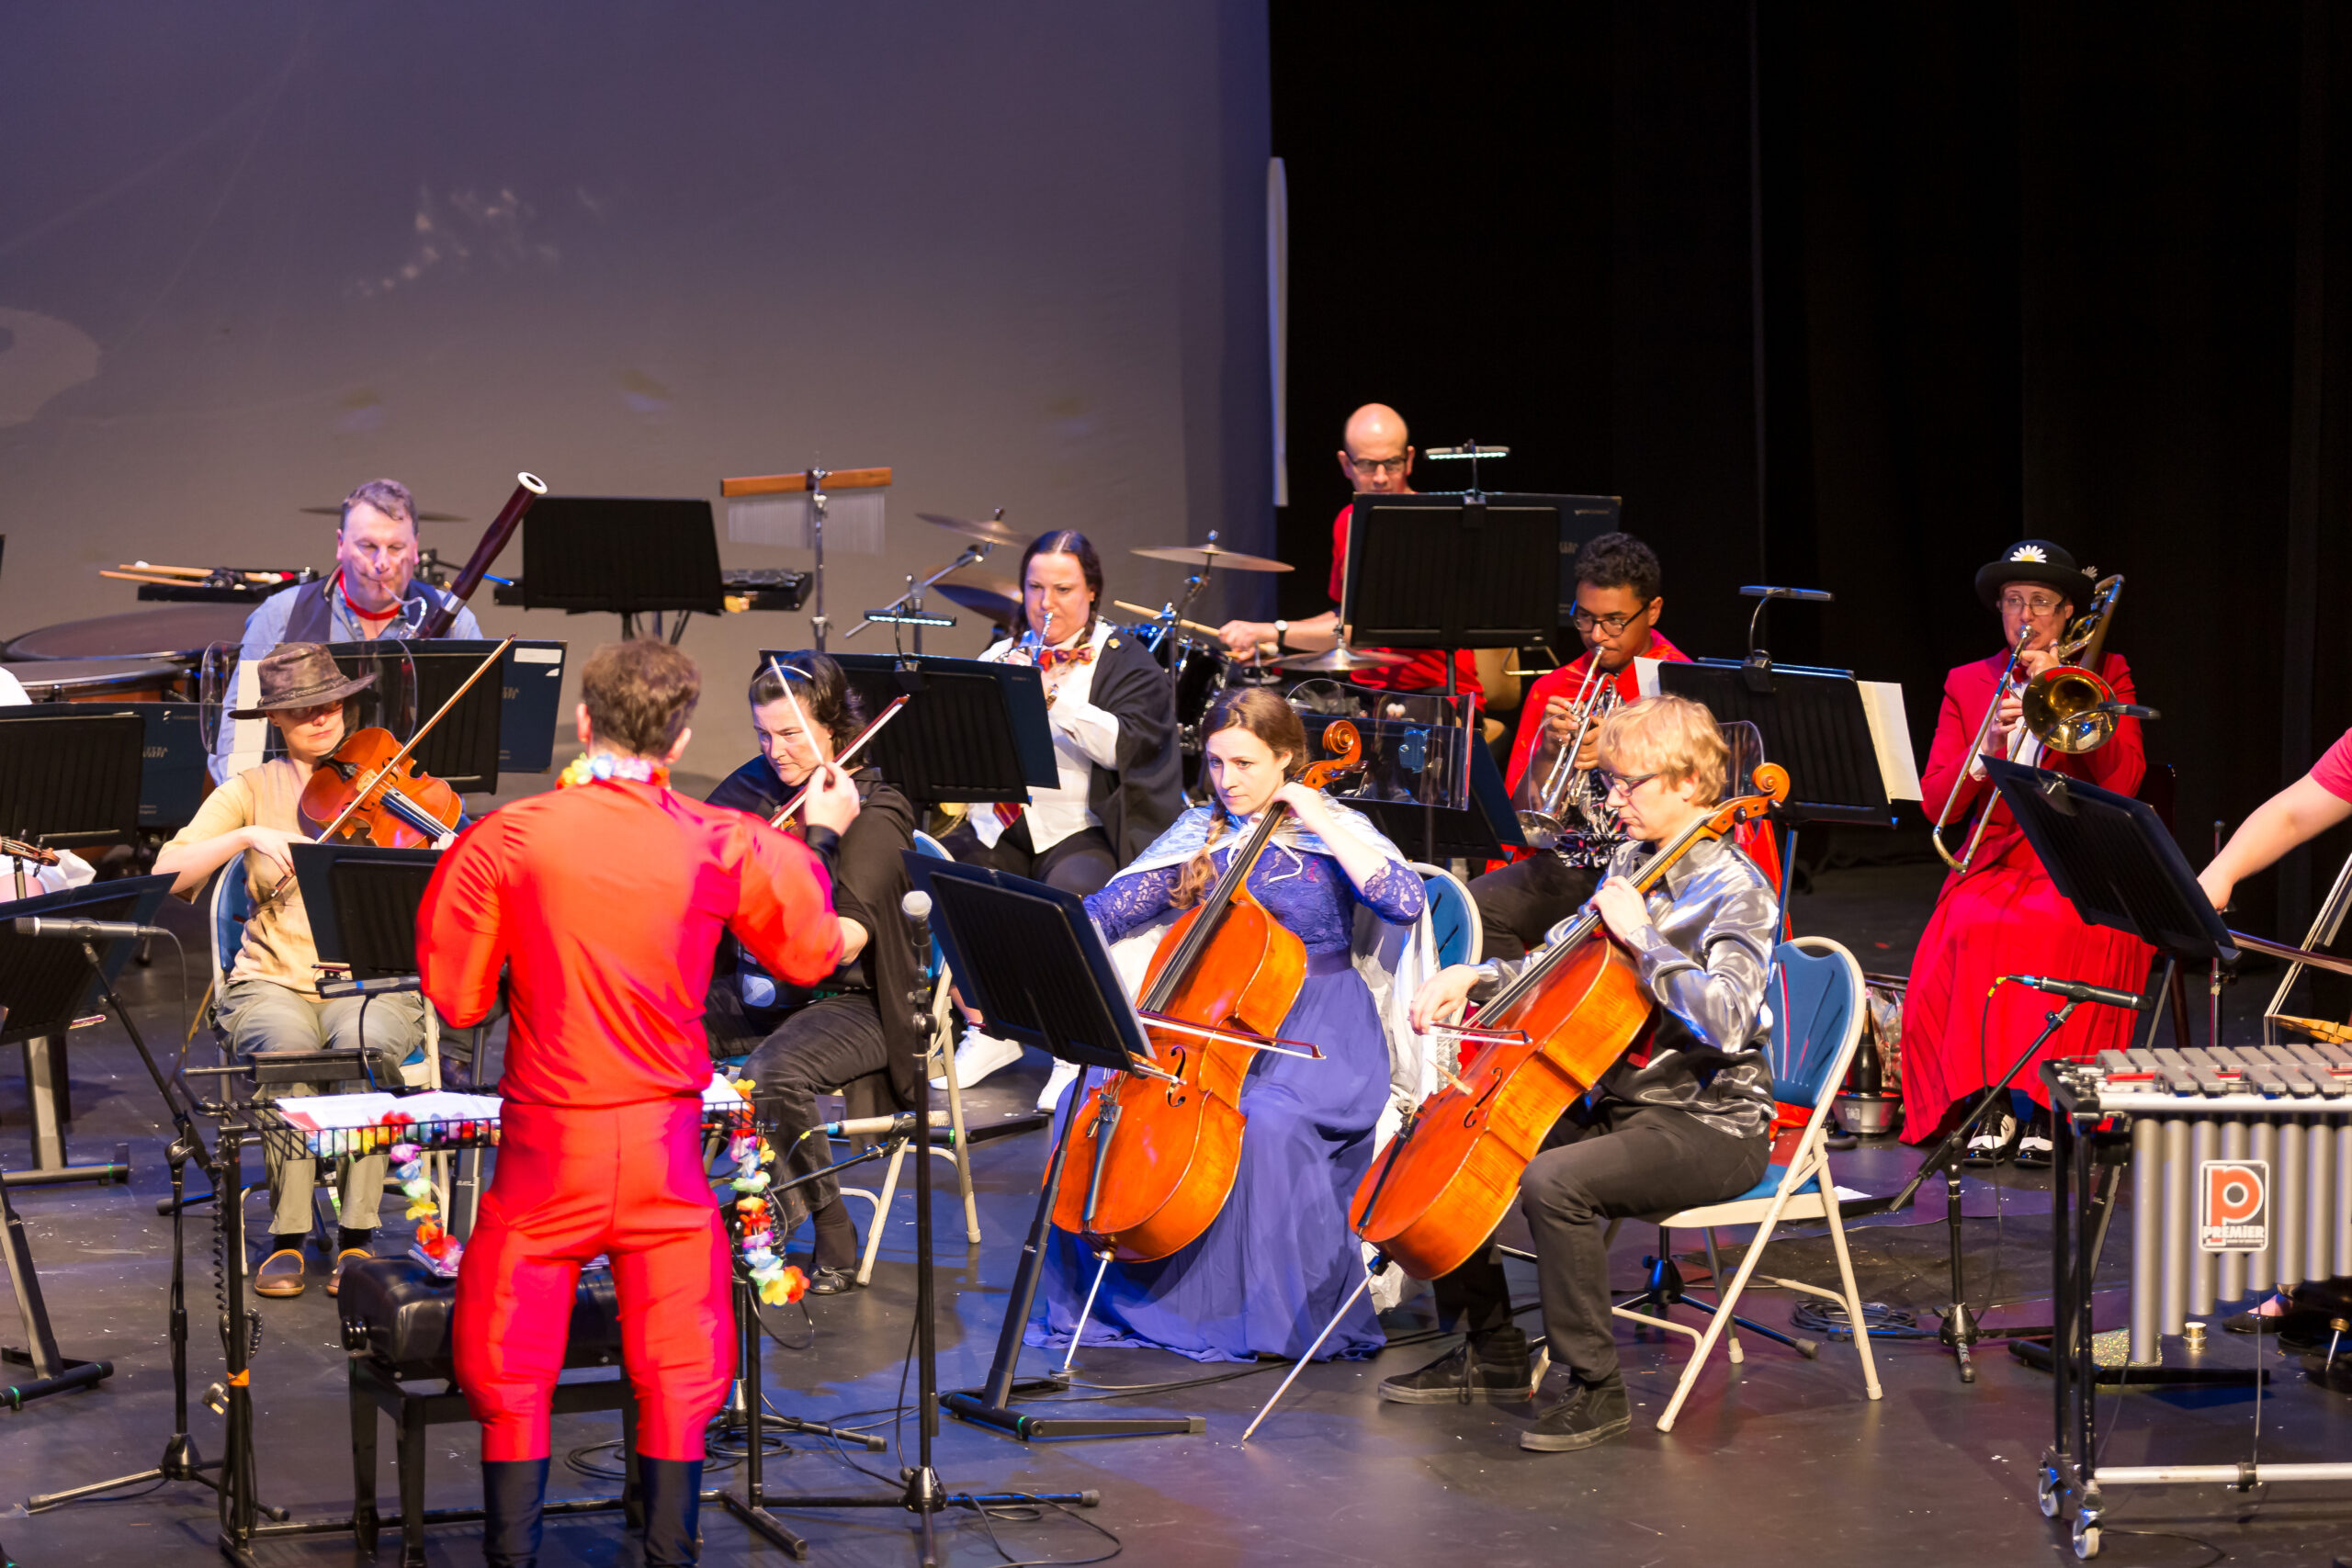 A close up of an orchestra playing while in fancy dress